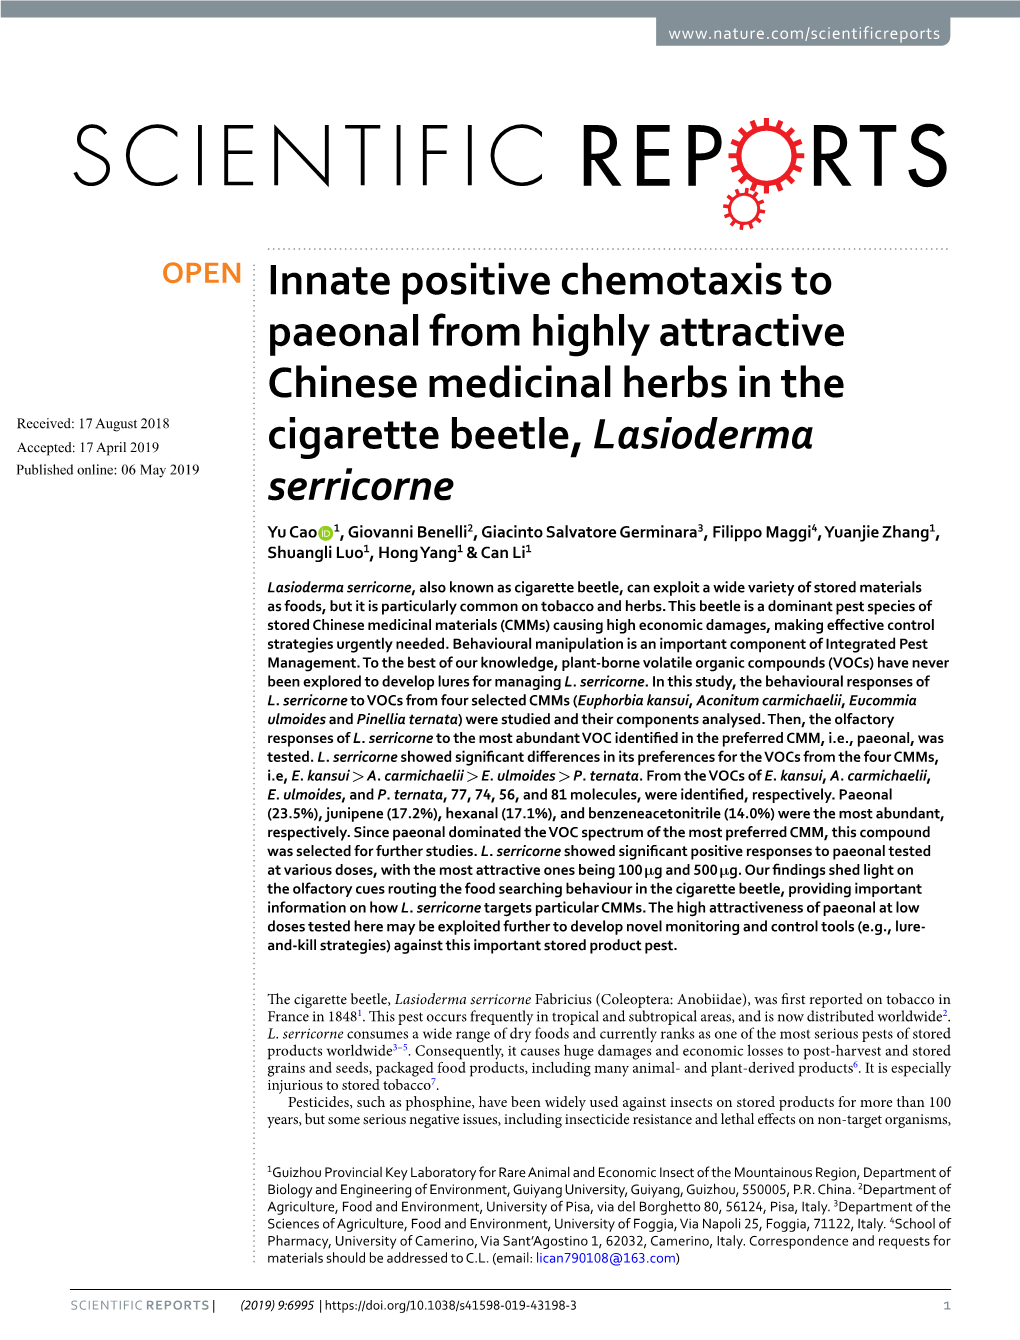 Innate Positive Chemotaxis to Paeonal from Highly Attractive Chinese